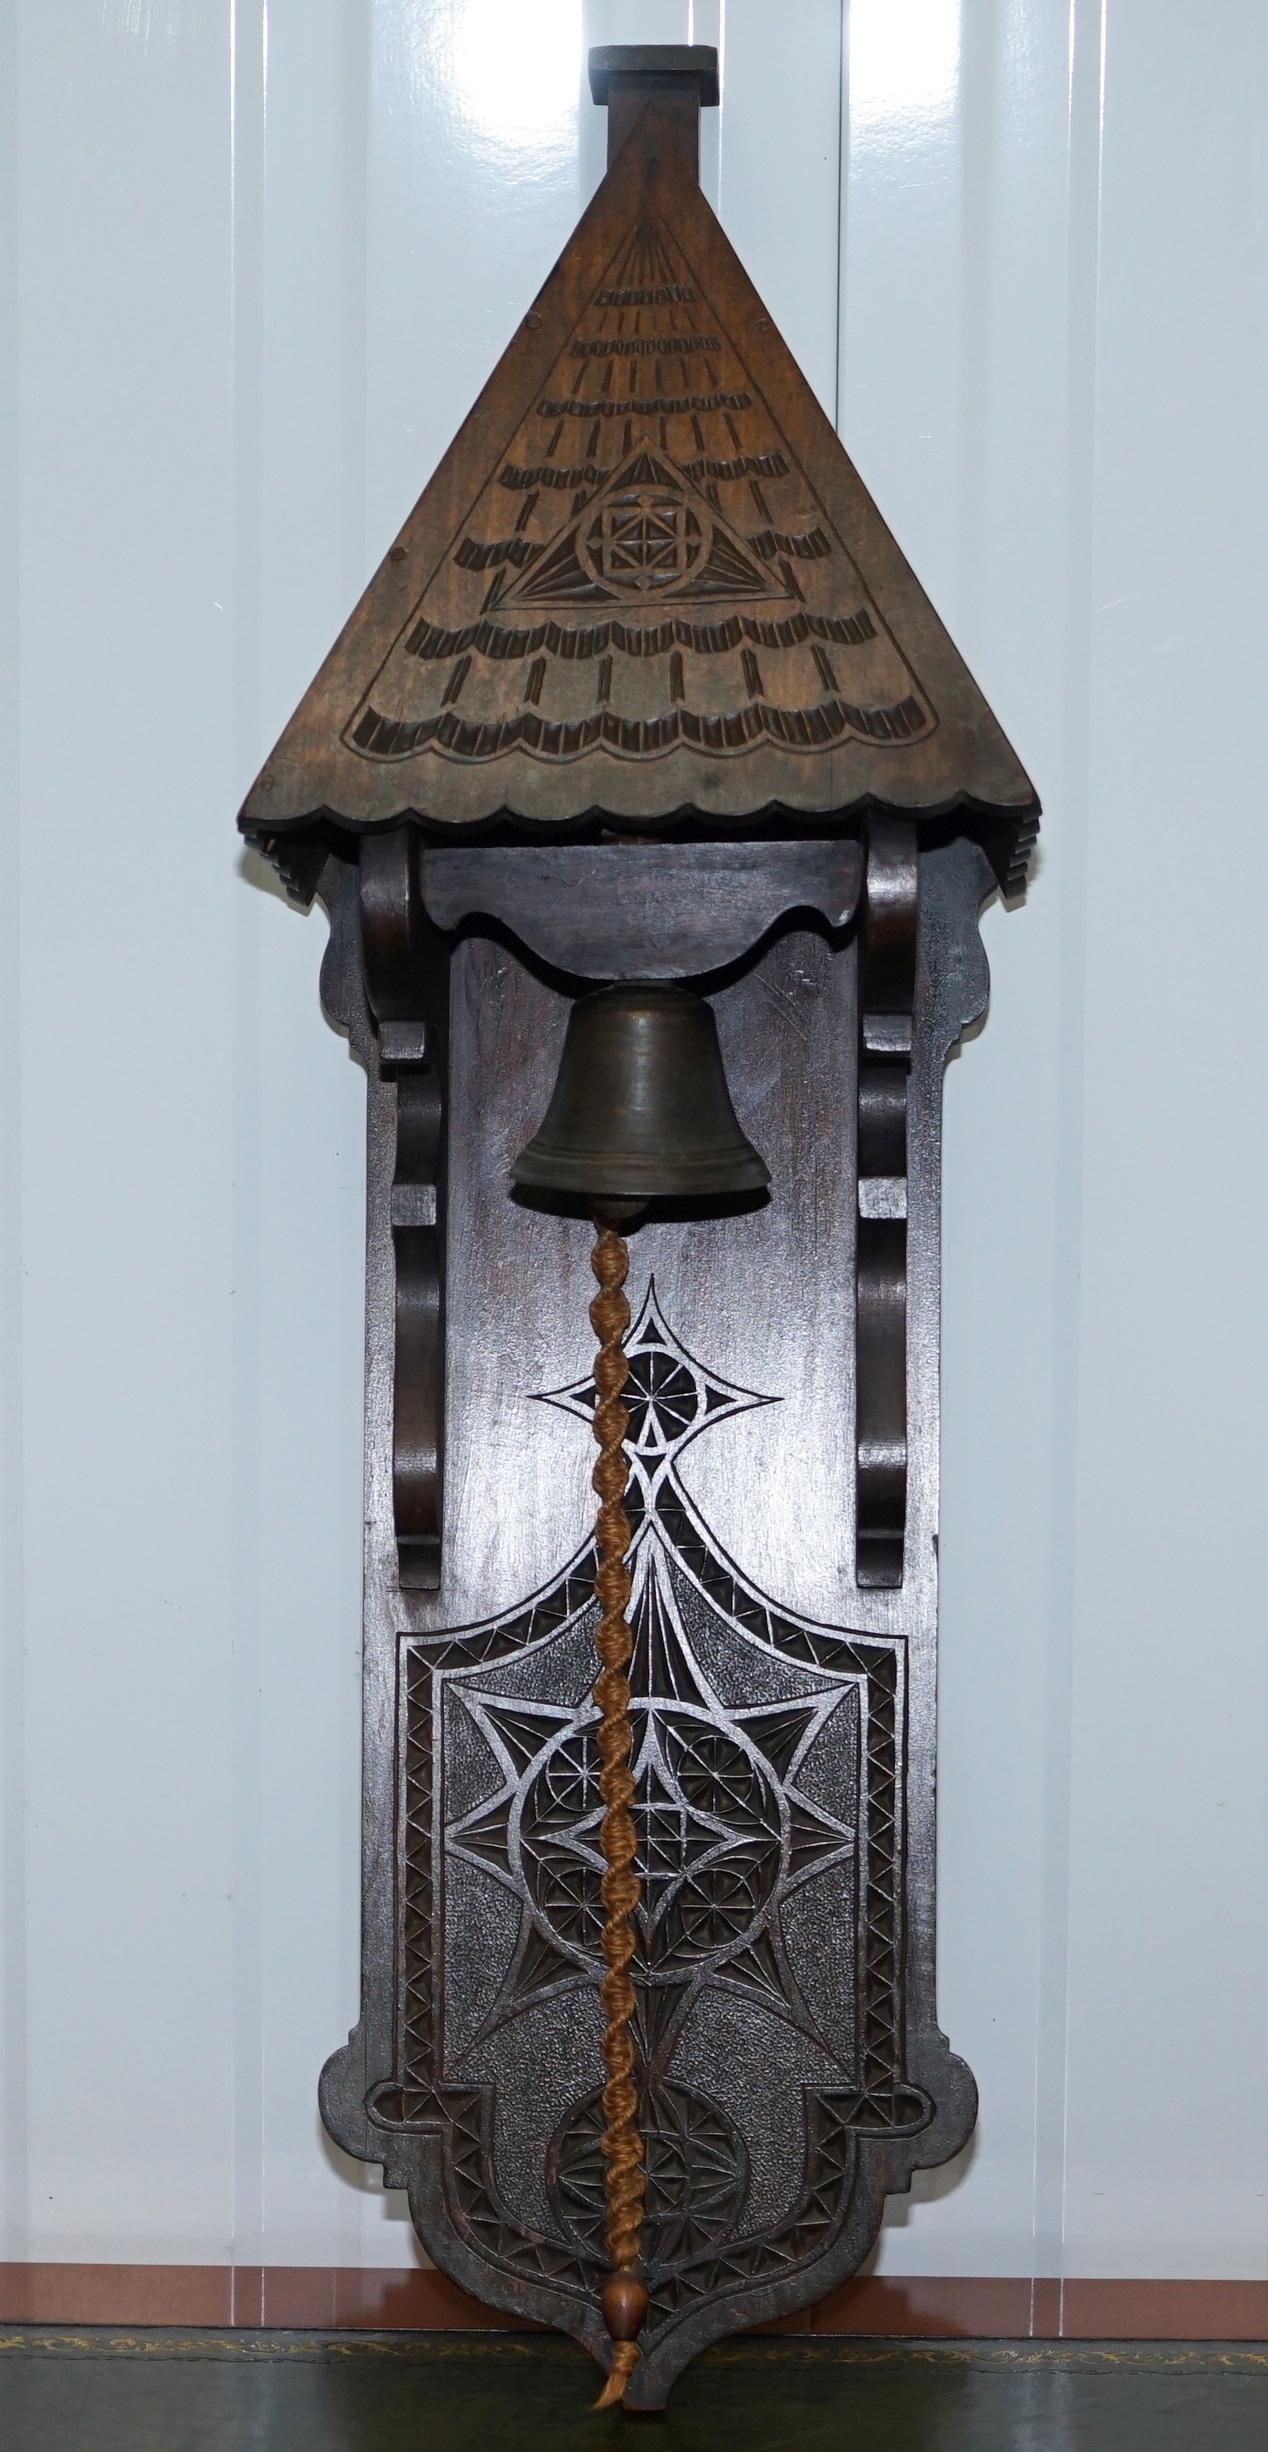 We are delighted to offer for sale this lovely rather grand looking Victorian doorbell

A very well made and decorative piece in lightly restored condition, we have cleaned waxed and polished the timber, the rope seems to be original and in